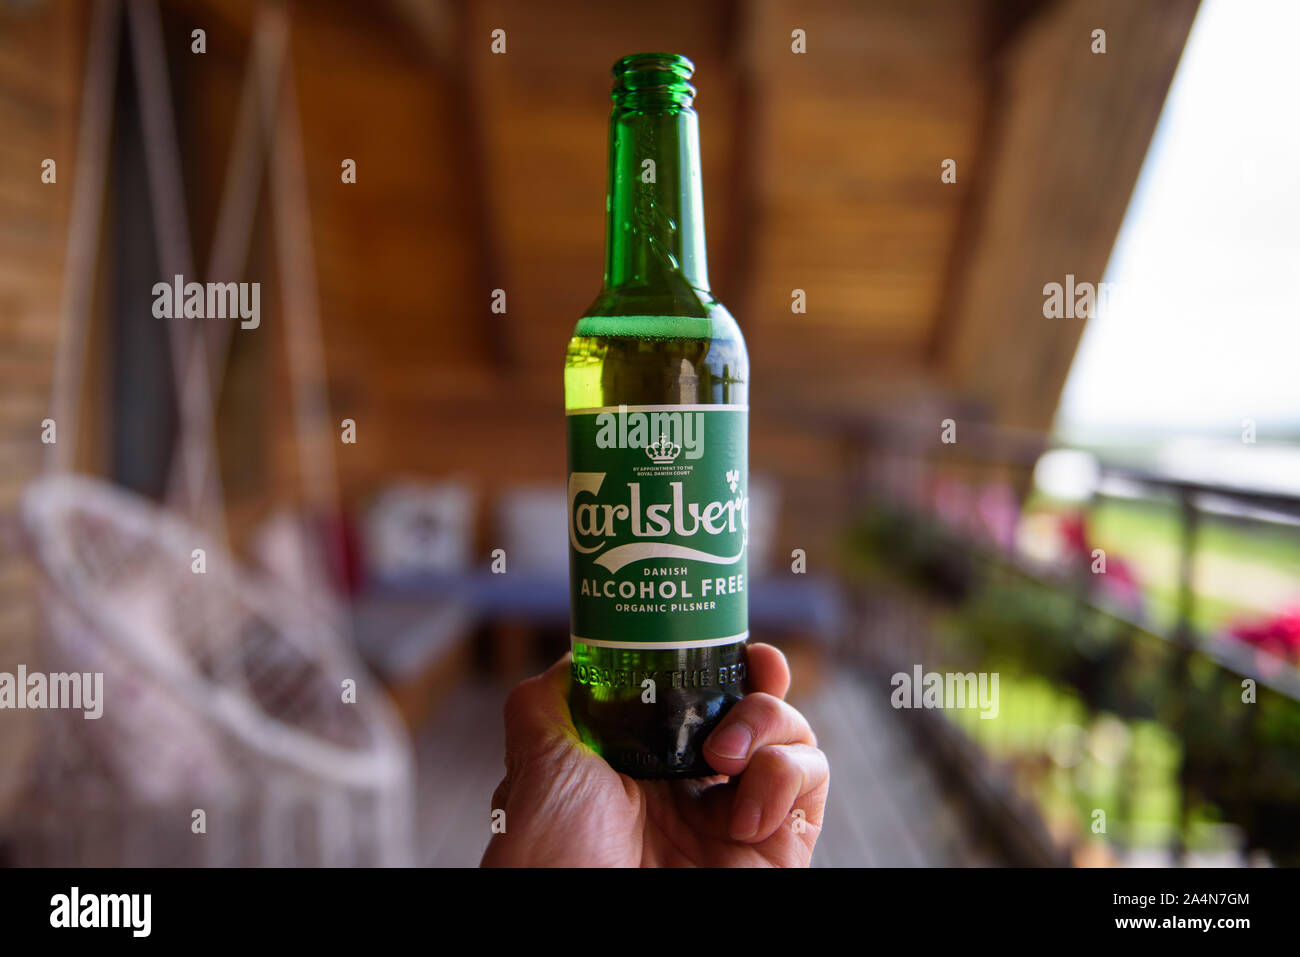 Danish Beer High Resolution Stock Photography and - Alamy